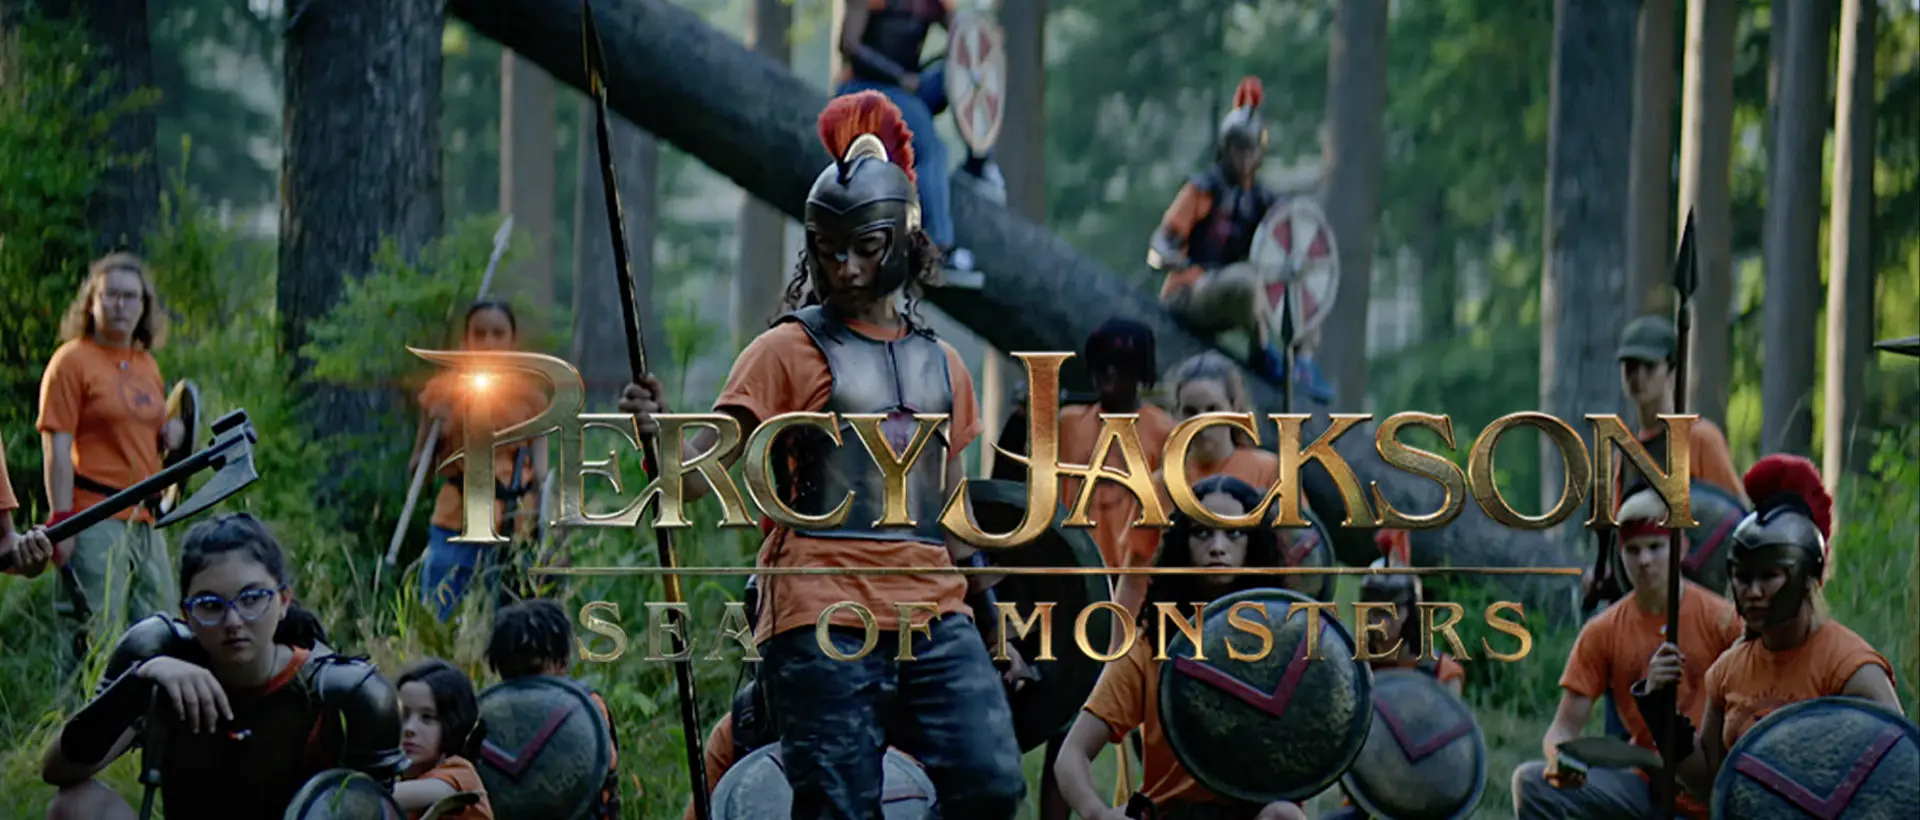 percy jackson s2 writers room banner